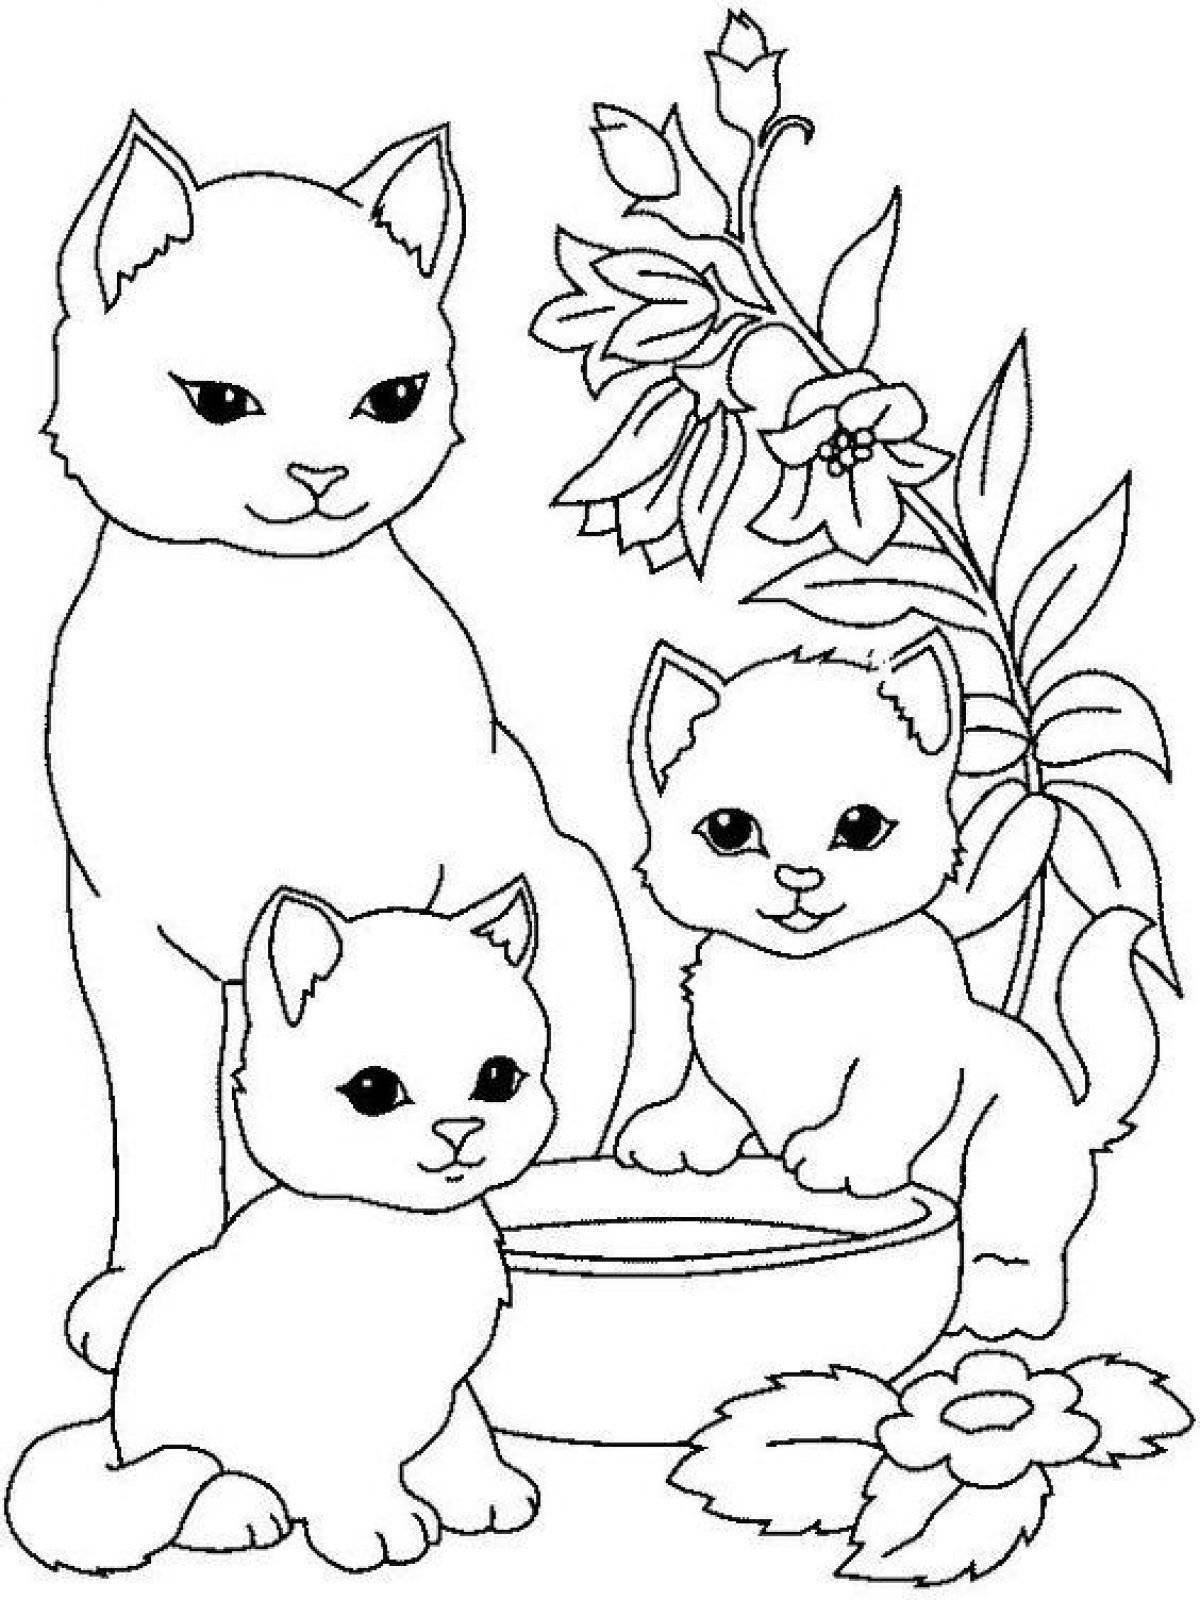 Fun coloring cat for children 5-6 years old